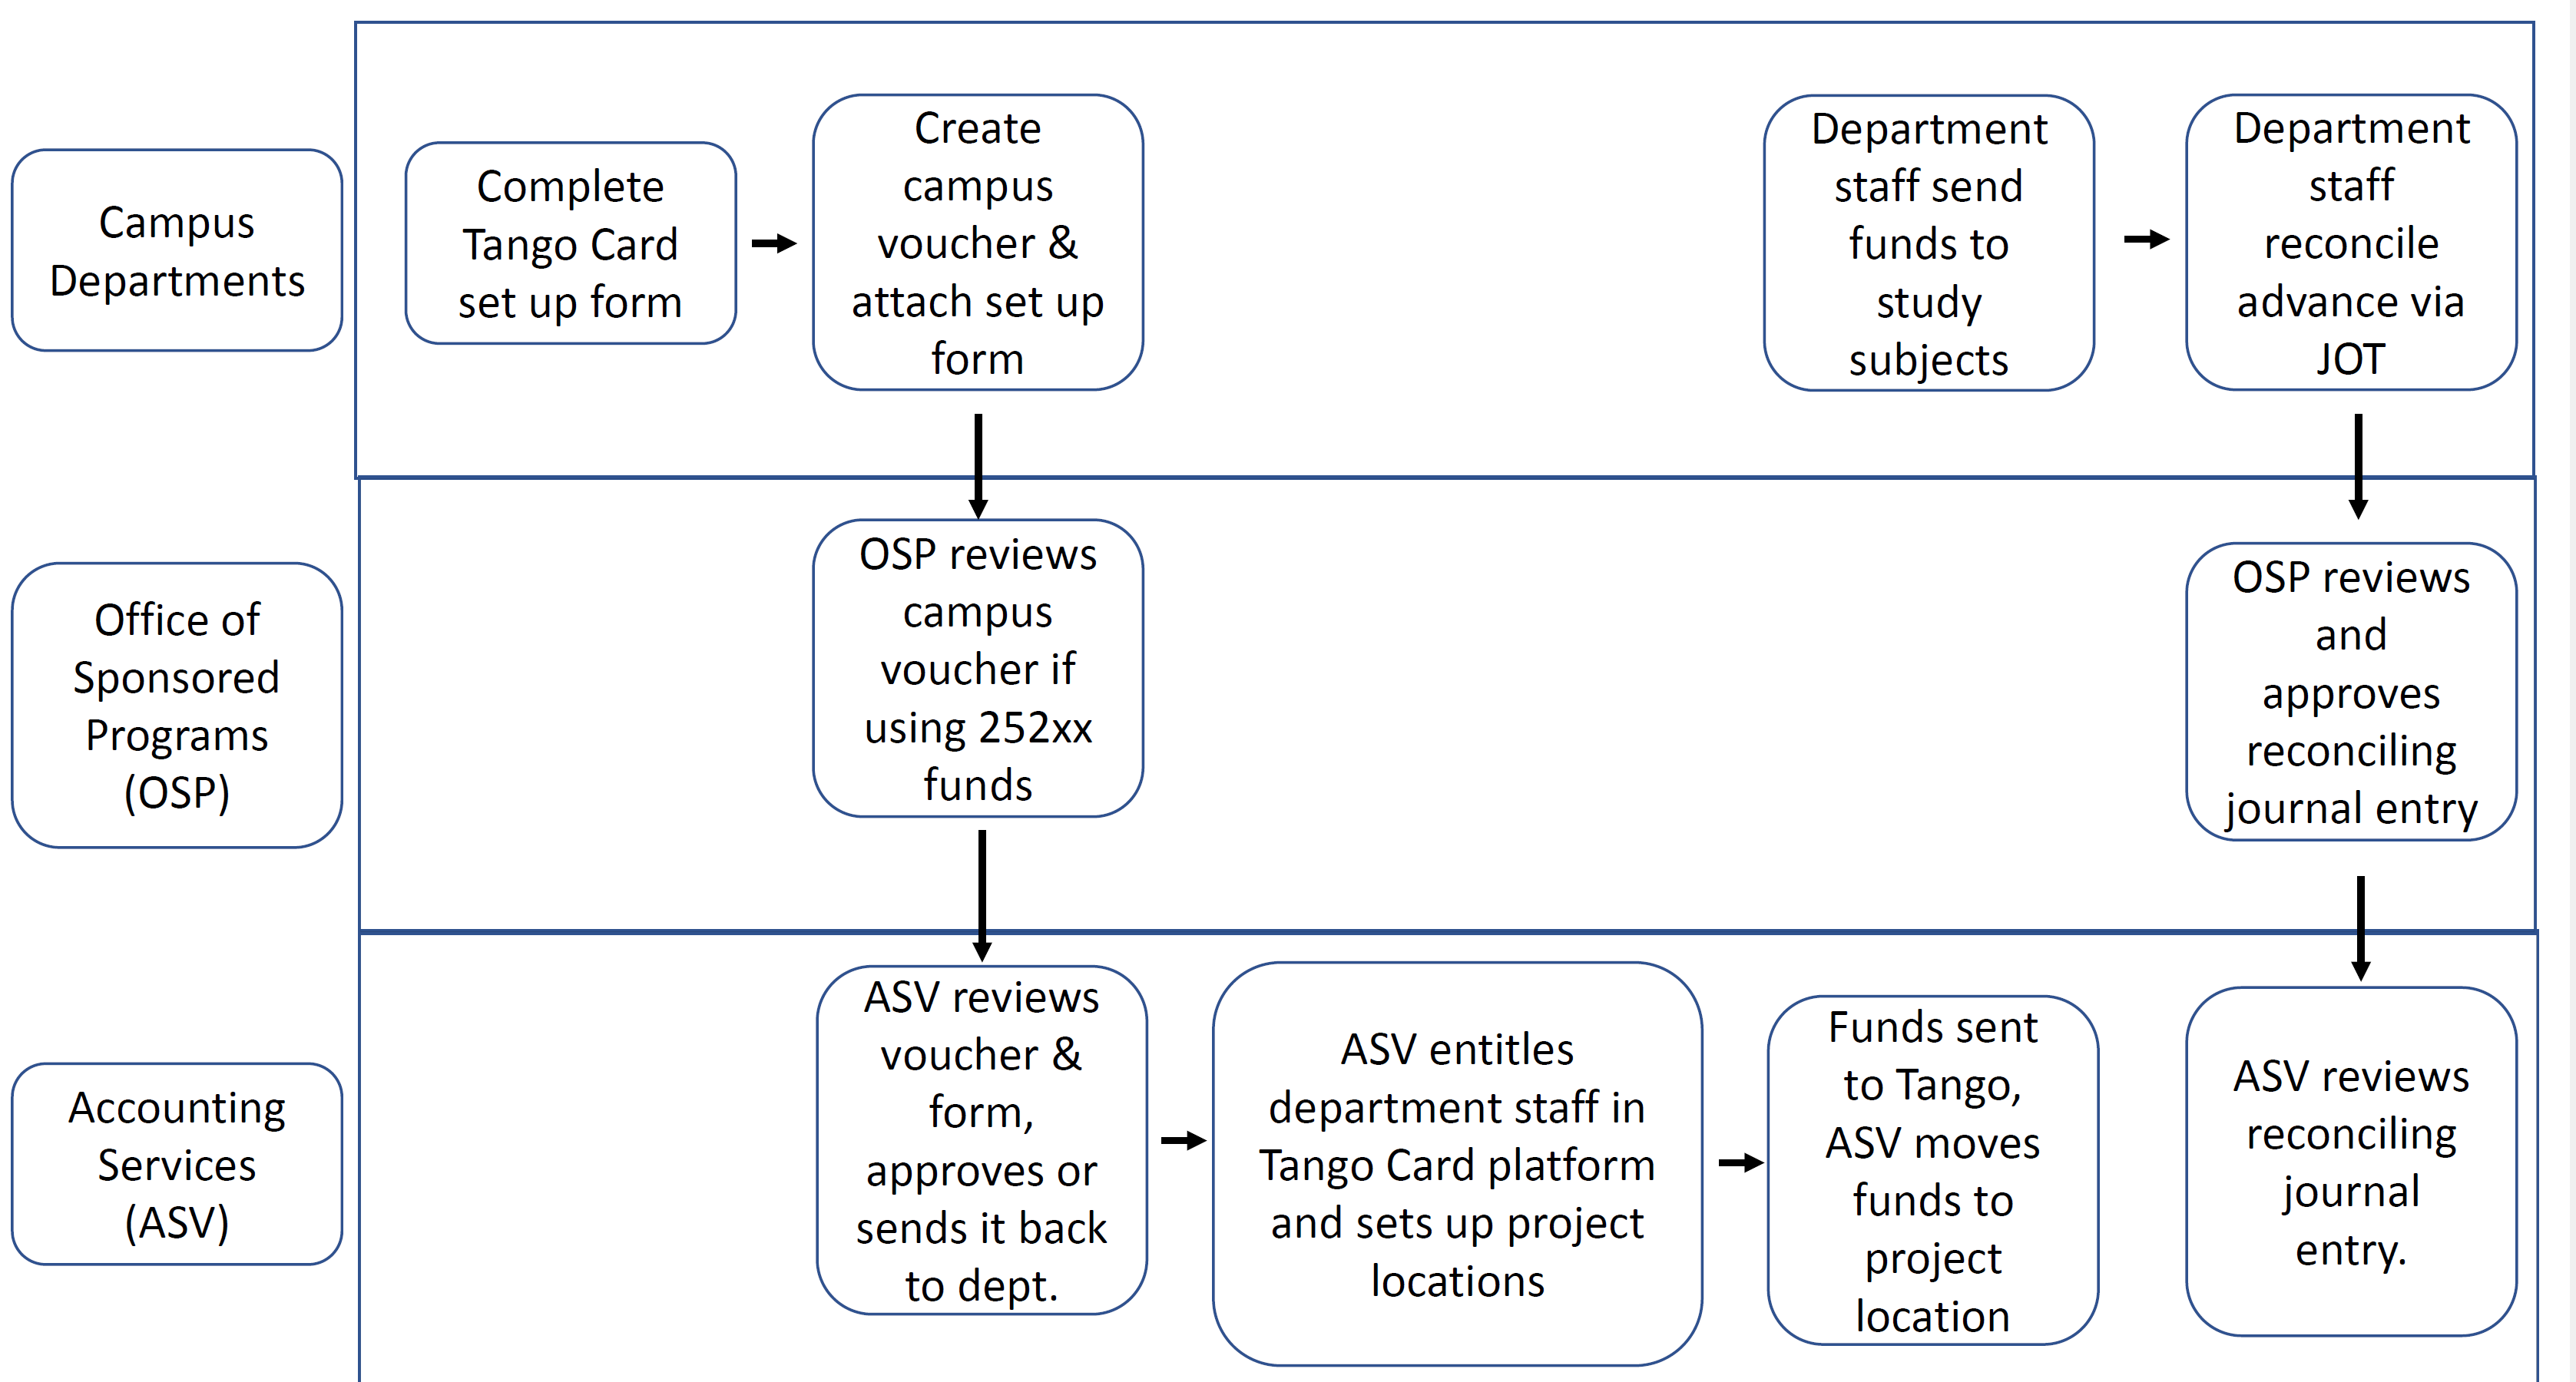 Process for requesting funds